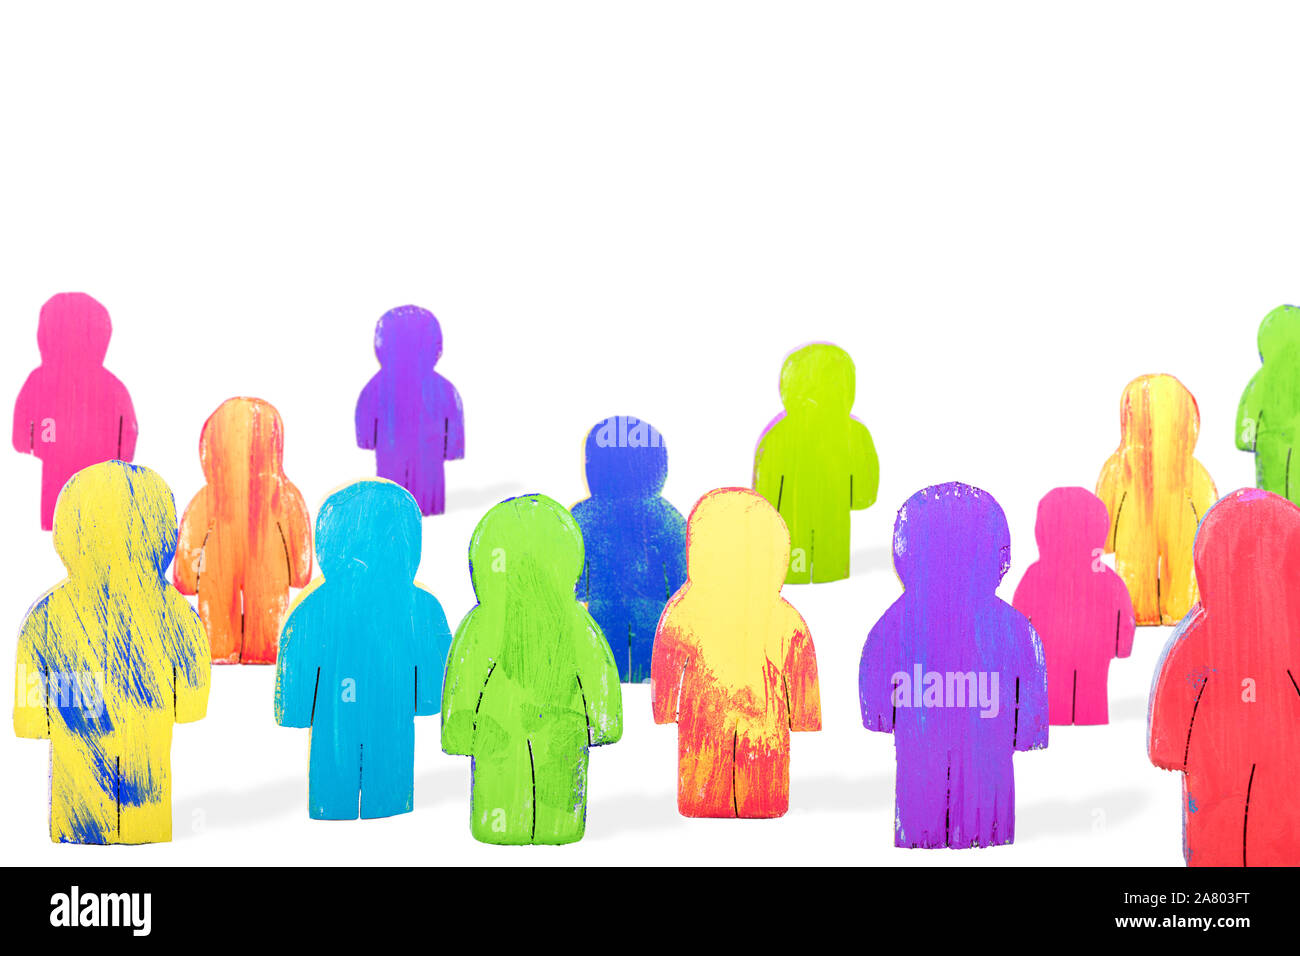 Diversity wooden figures isolated, concept community and team spirit, copyspace Stock Photo